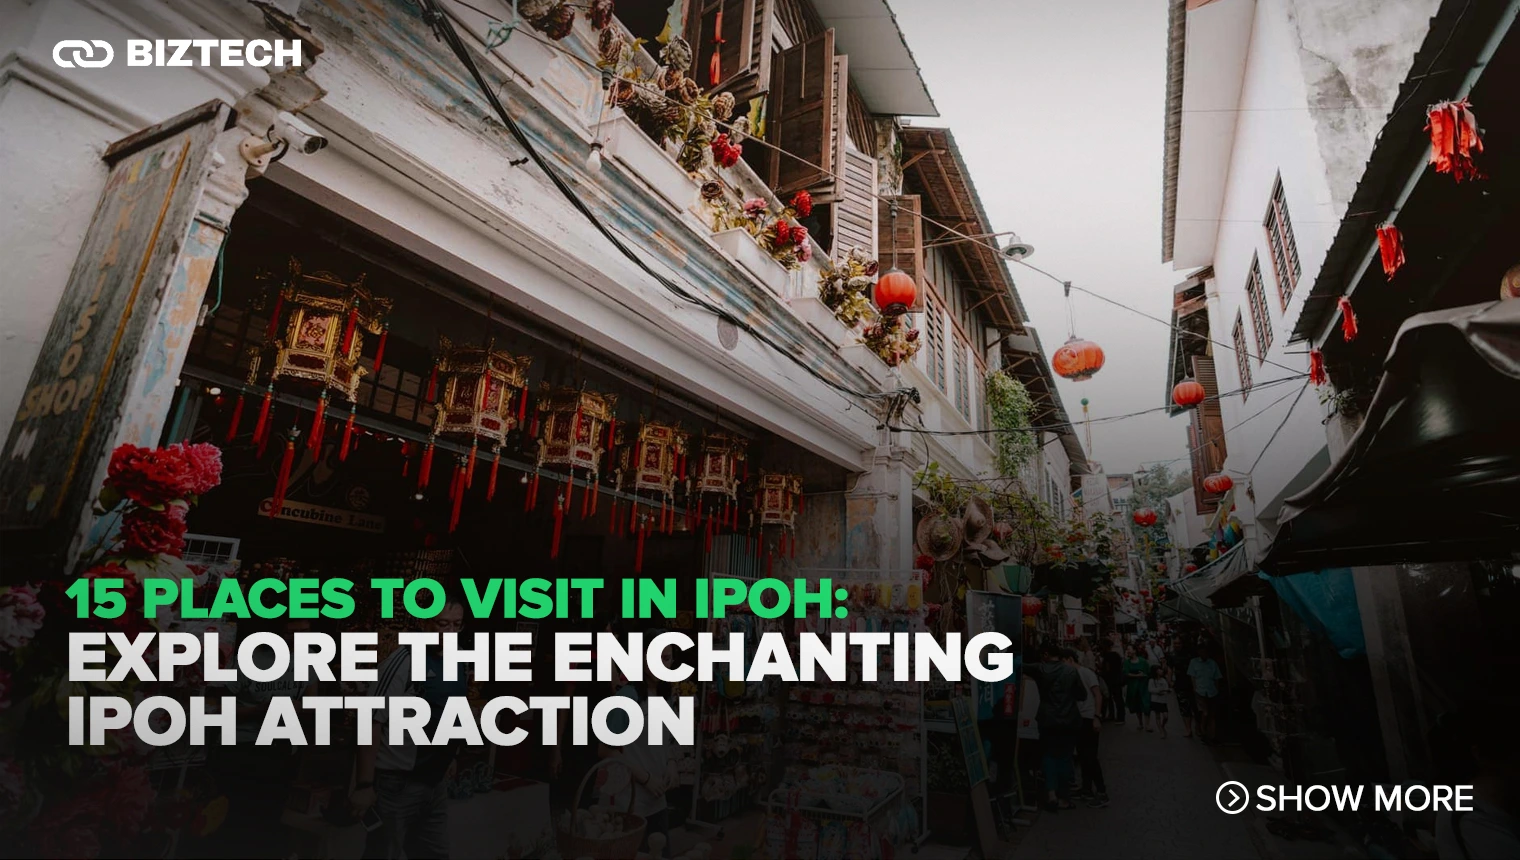 15 Places to Visit in Ipoh: Explore the Enchanting Ipoh Attraction